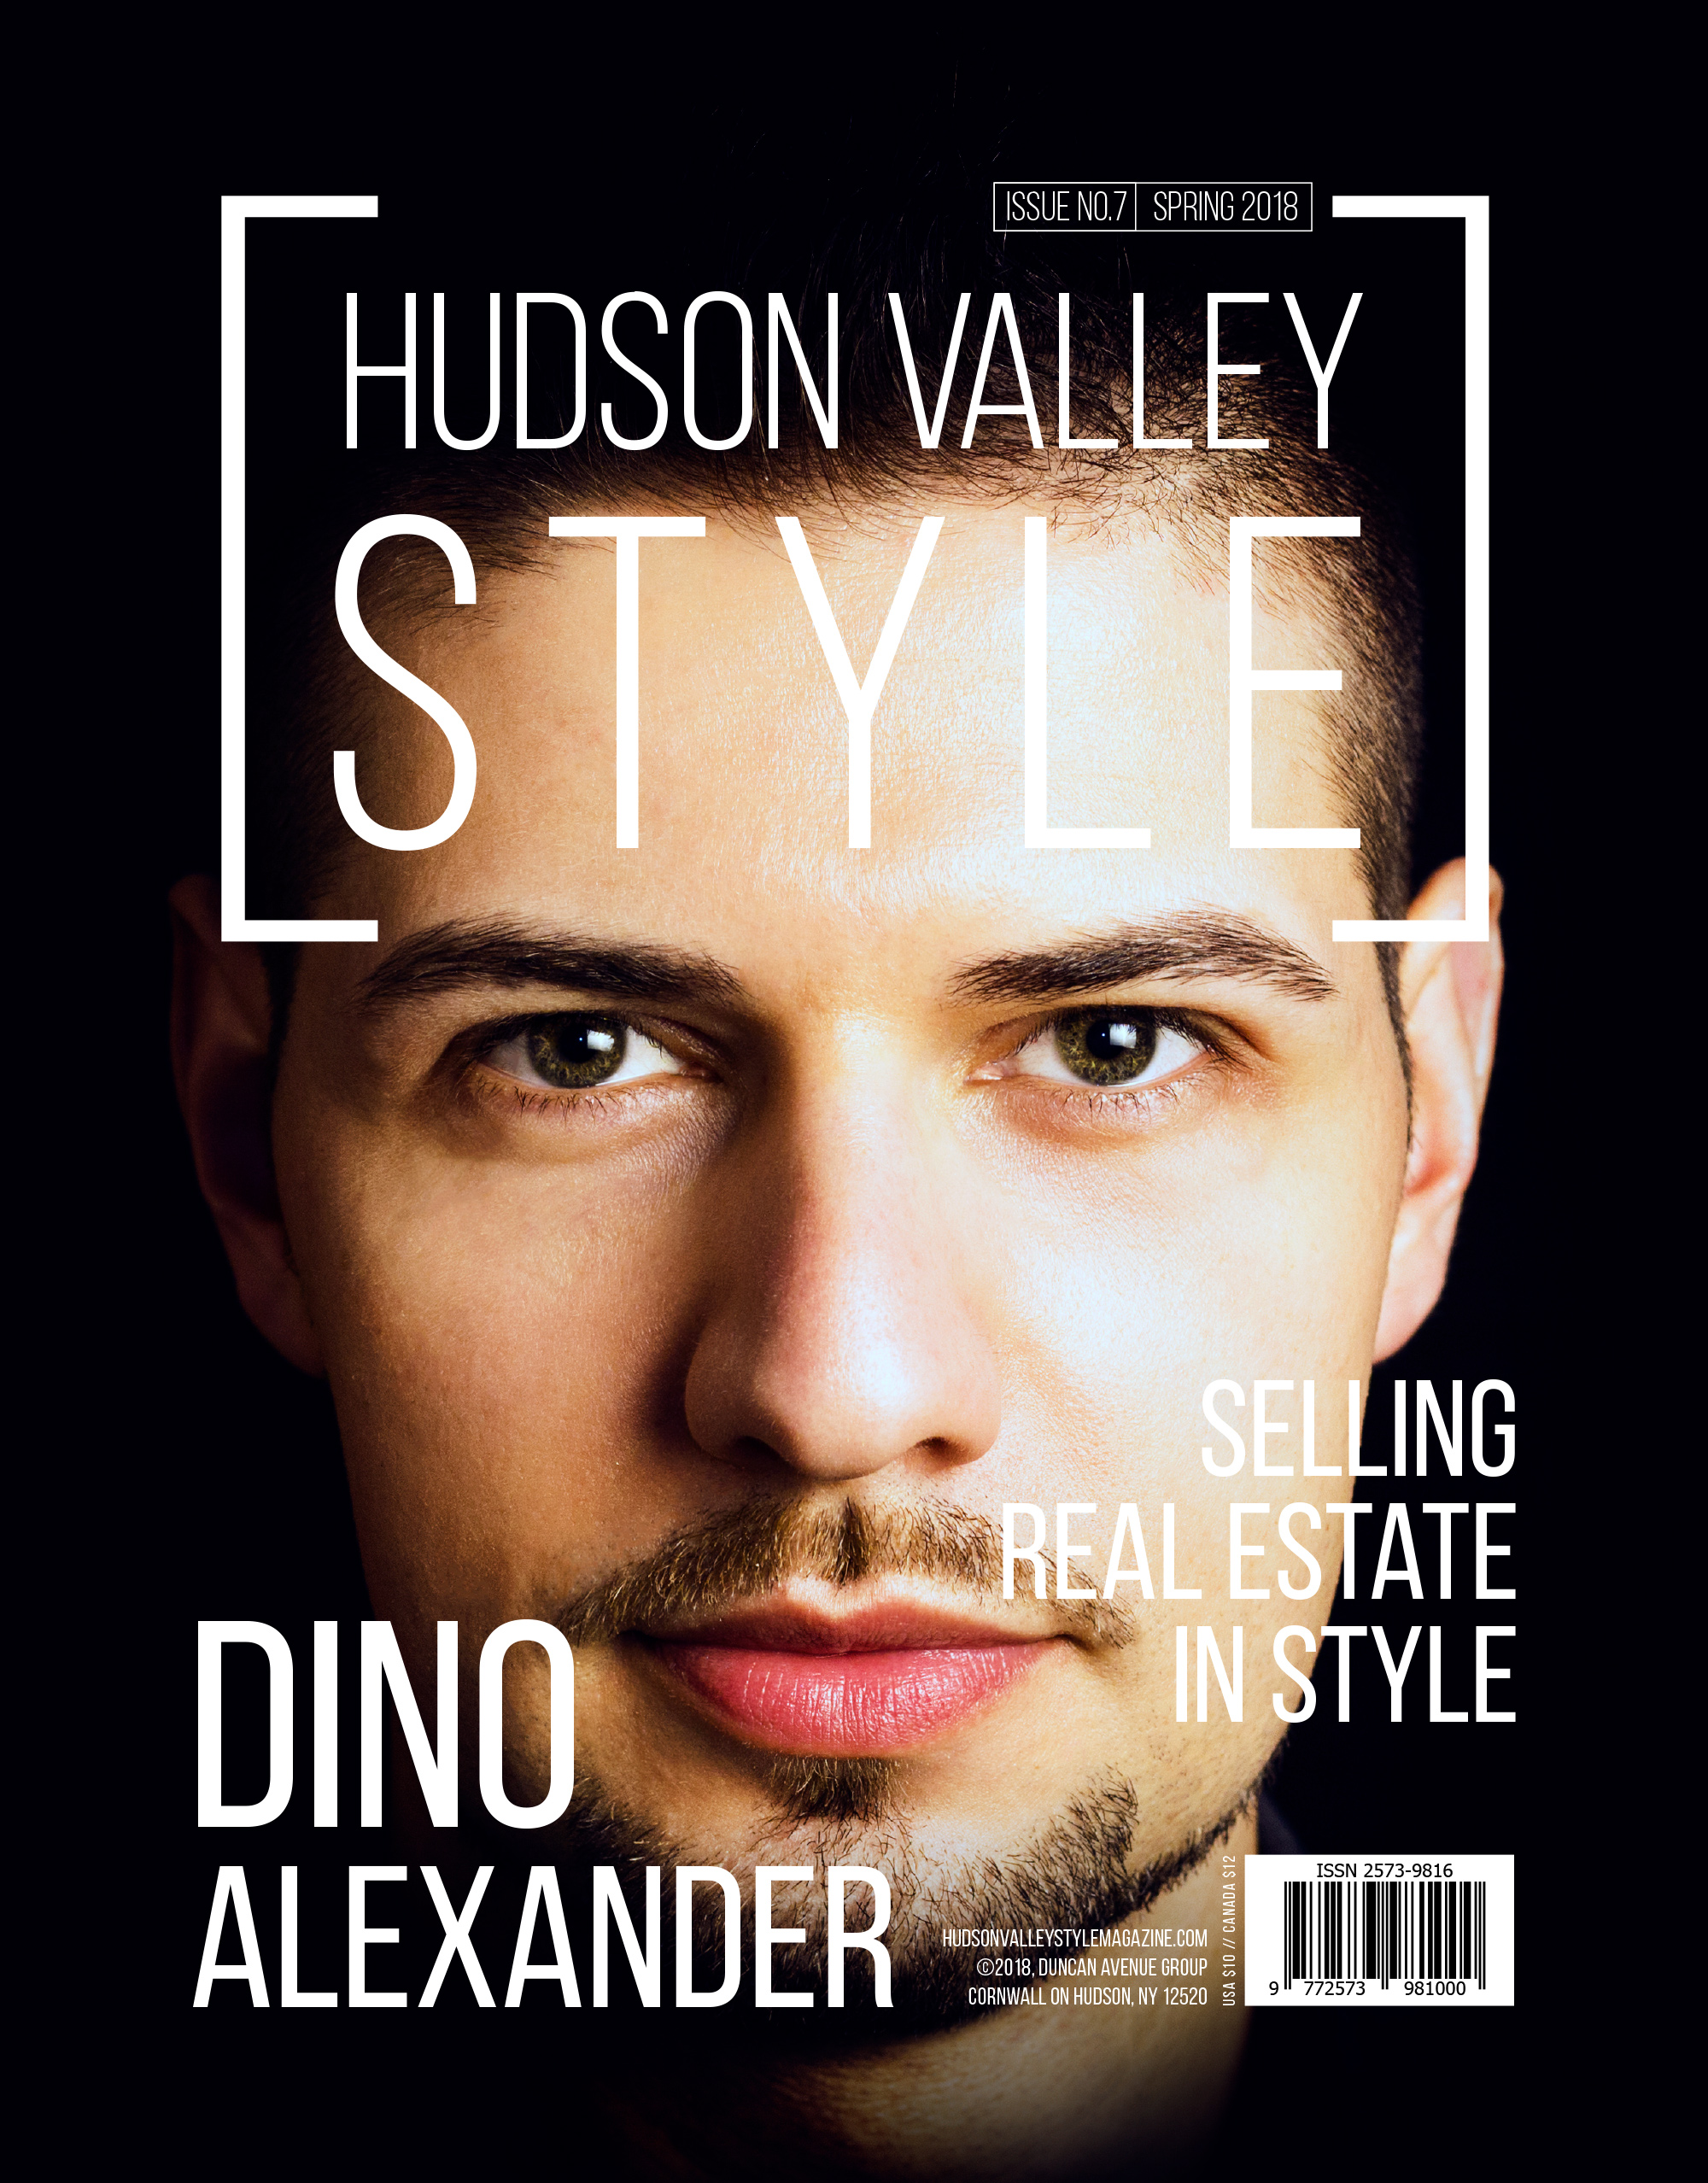 Hudson Valley Style Magazine Spring 2018 Cover - Dino Alexander - Selling Real Estate in Style